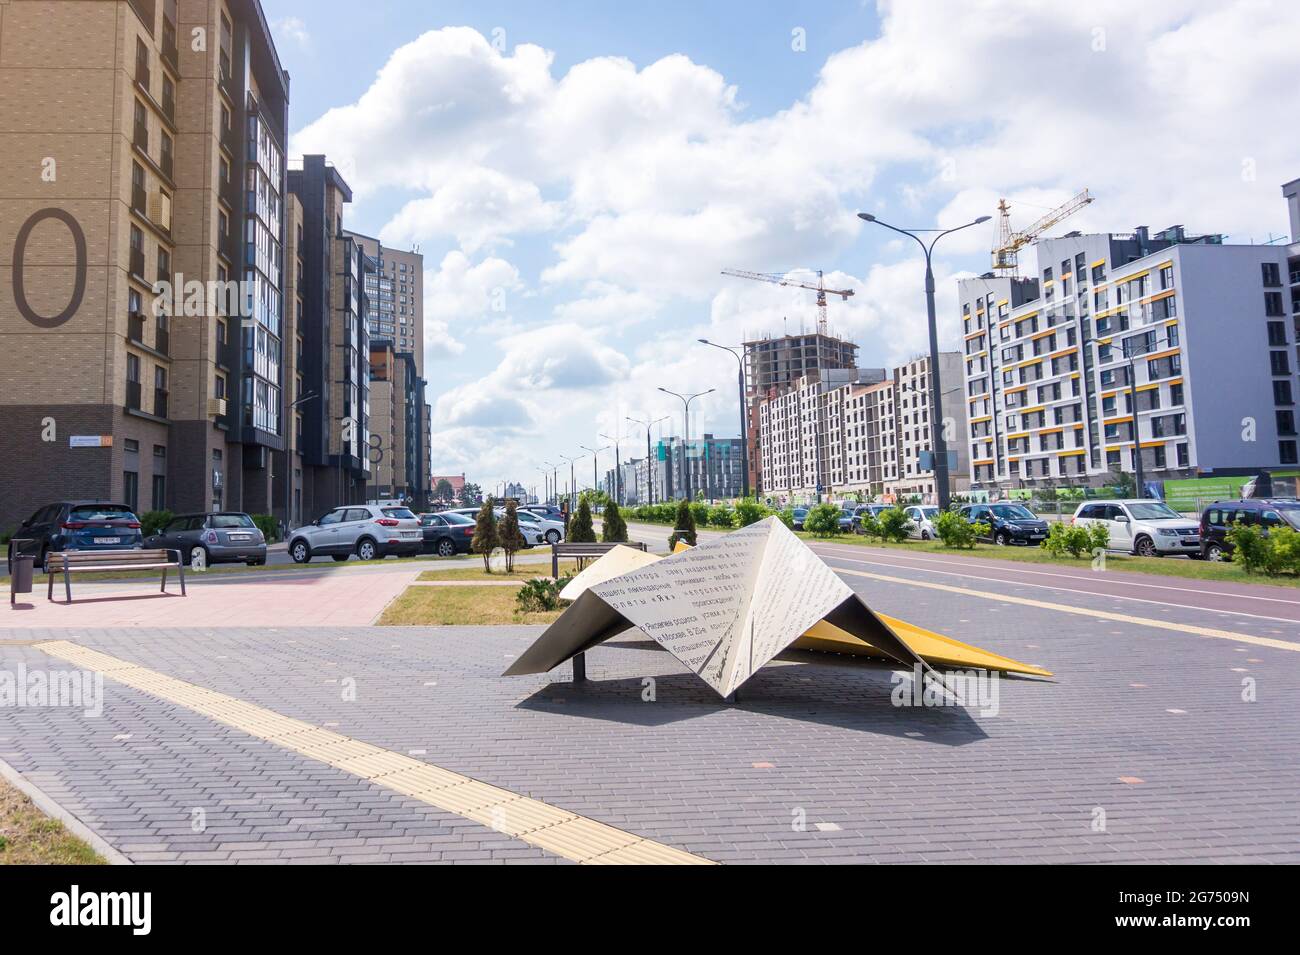 MINSK, BELARUS - JUNE 26, 2021: Novaya Borovaya or New Bor district, residential complex with modern apartment buildings in the city of Minsk, Belarus Stock Photo